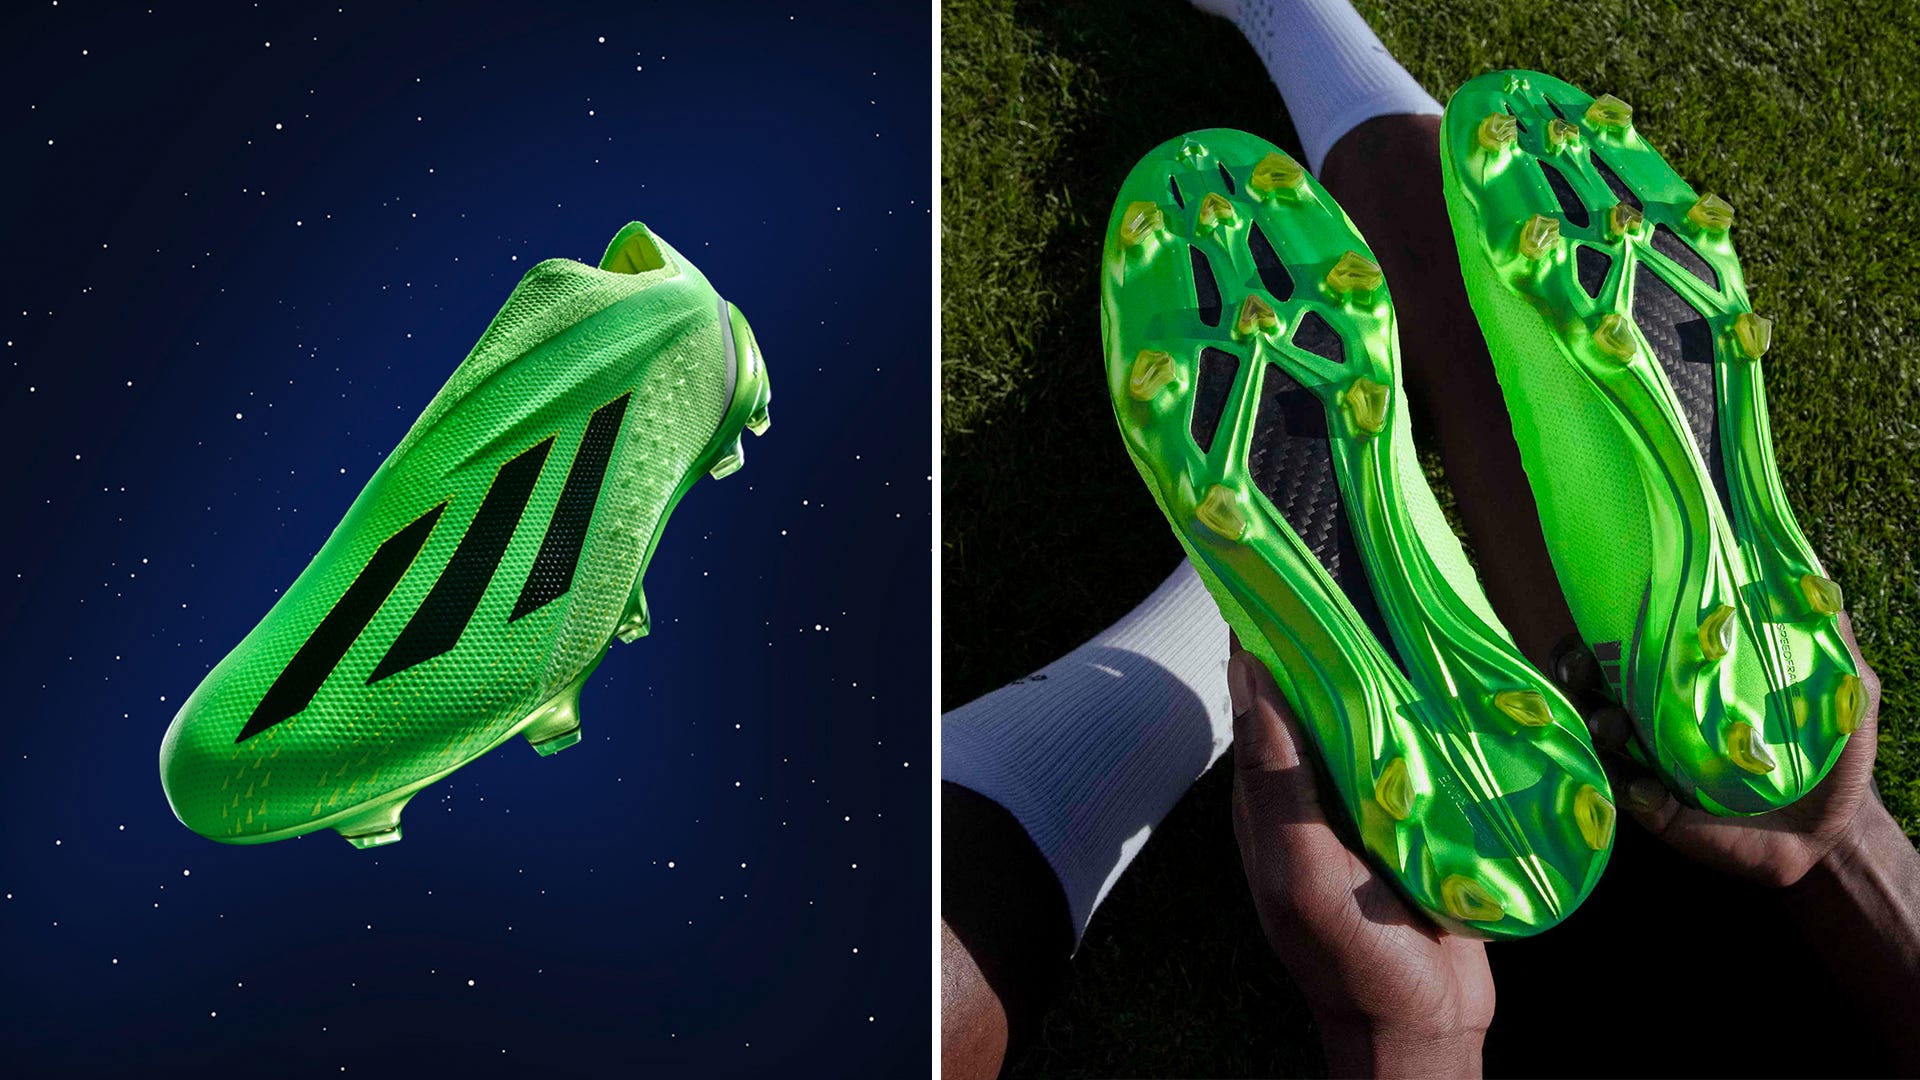 Speed, stability and Rick and Morty: Explaining adidas' new Speedportal boots | Goal.com